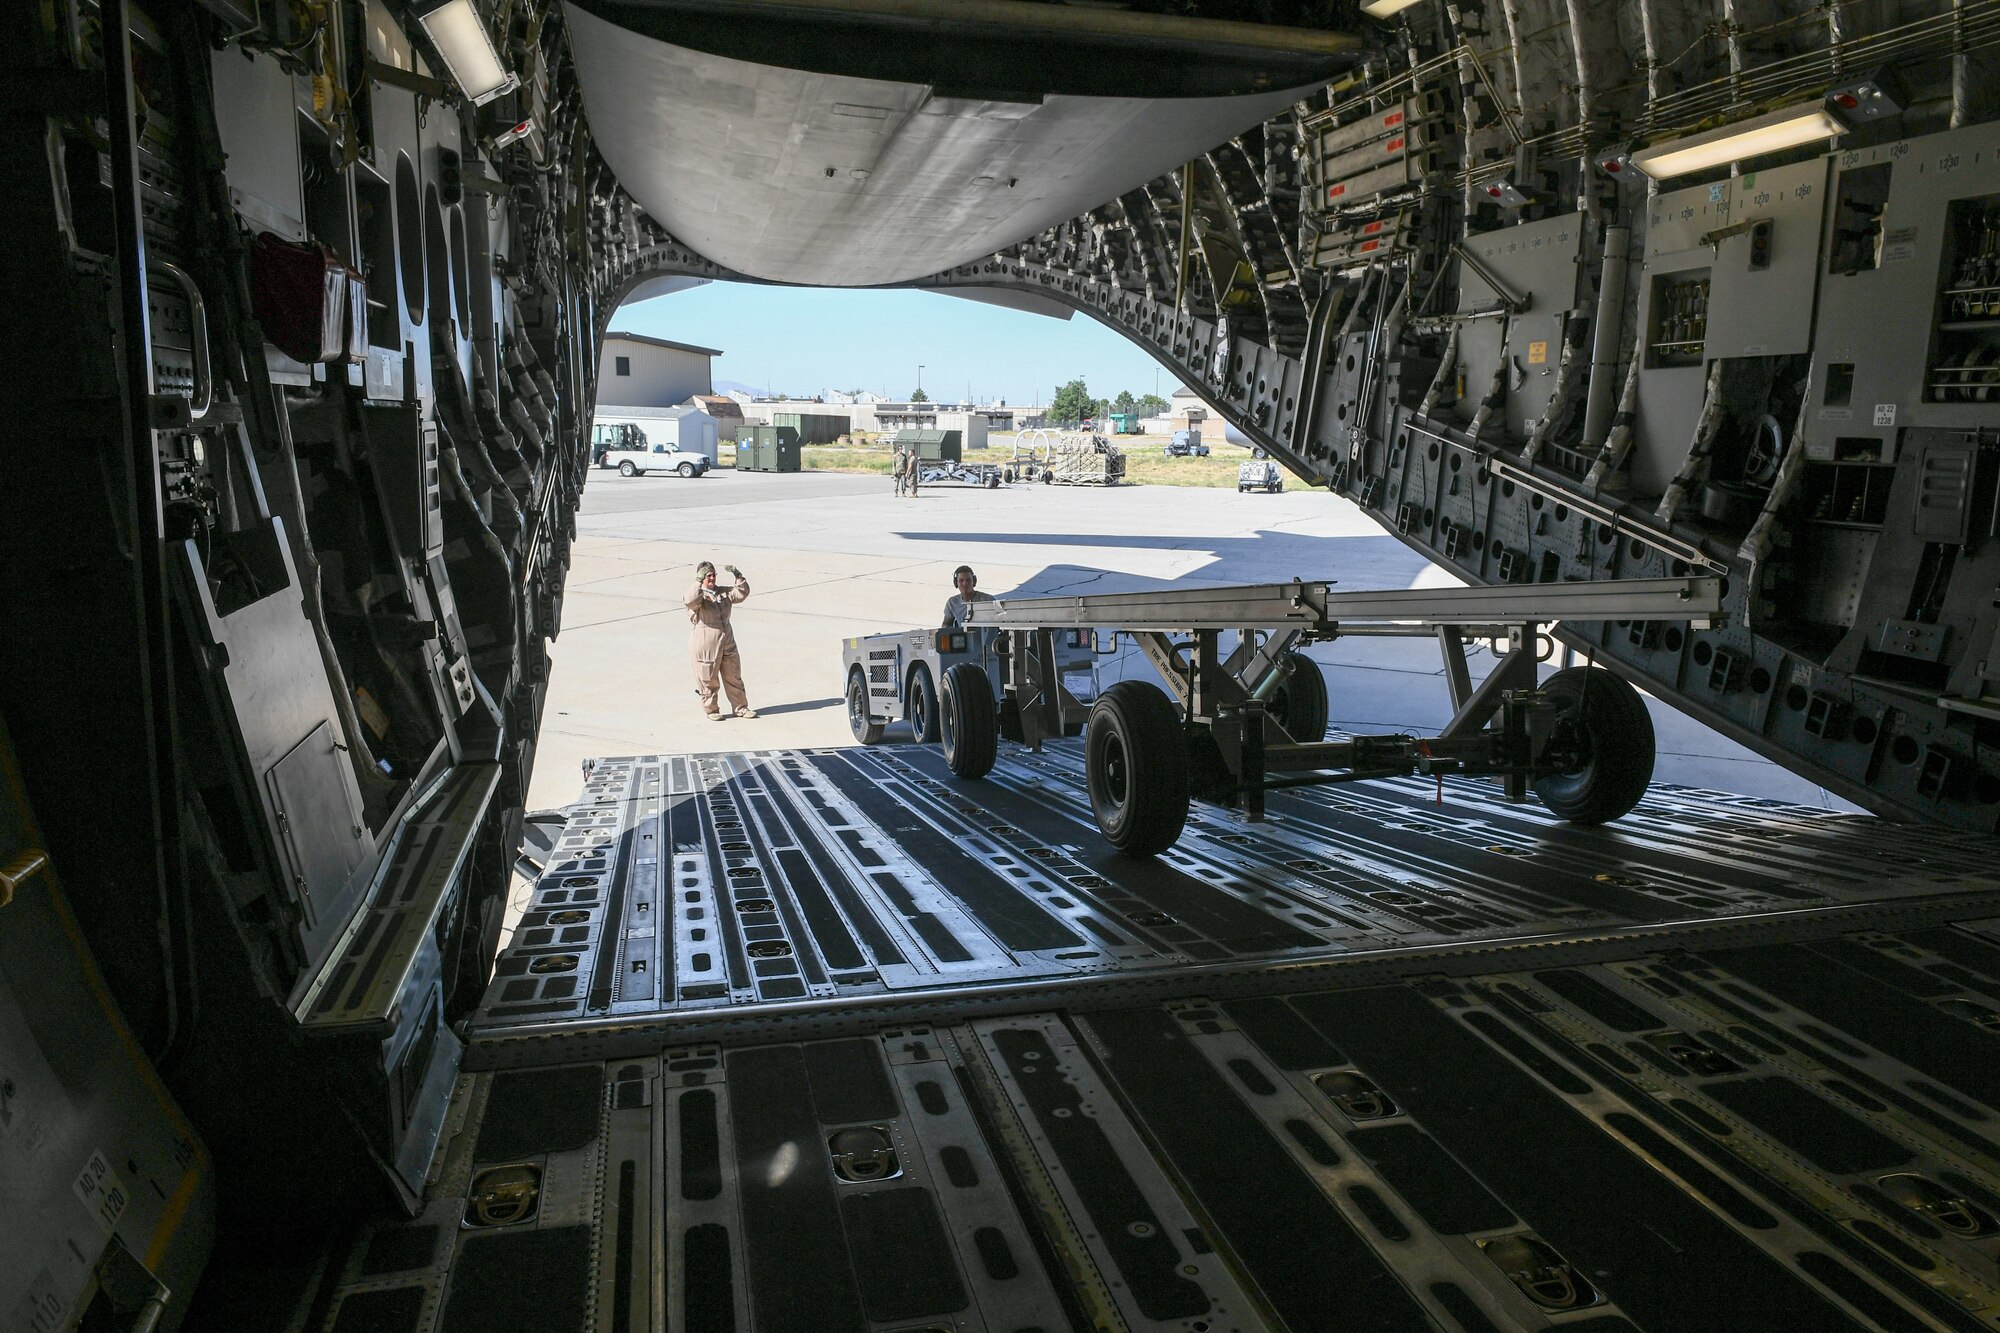 Senior Airman DeShain Calloway, 75th Logistics Readiness Squadron, unloads cargo from a C-17 Globemaster III at Hill Air Force Base, Utah, Aug. 9, 2019, with guidance from loadmaster Senior Master Sgt. Denise Roberts, 89th Airlift Squadron. The Reserve 89th AS is assigned to the 445th Aircraft Wing out of Wright-Patterson AFB, Ohio. (U.S. Air Force photo by Cynthia Griggs)